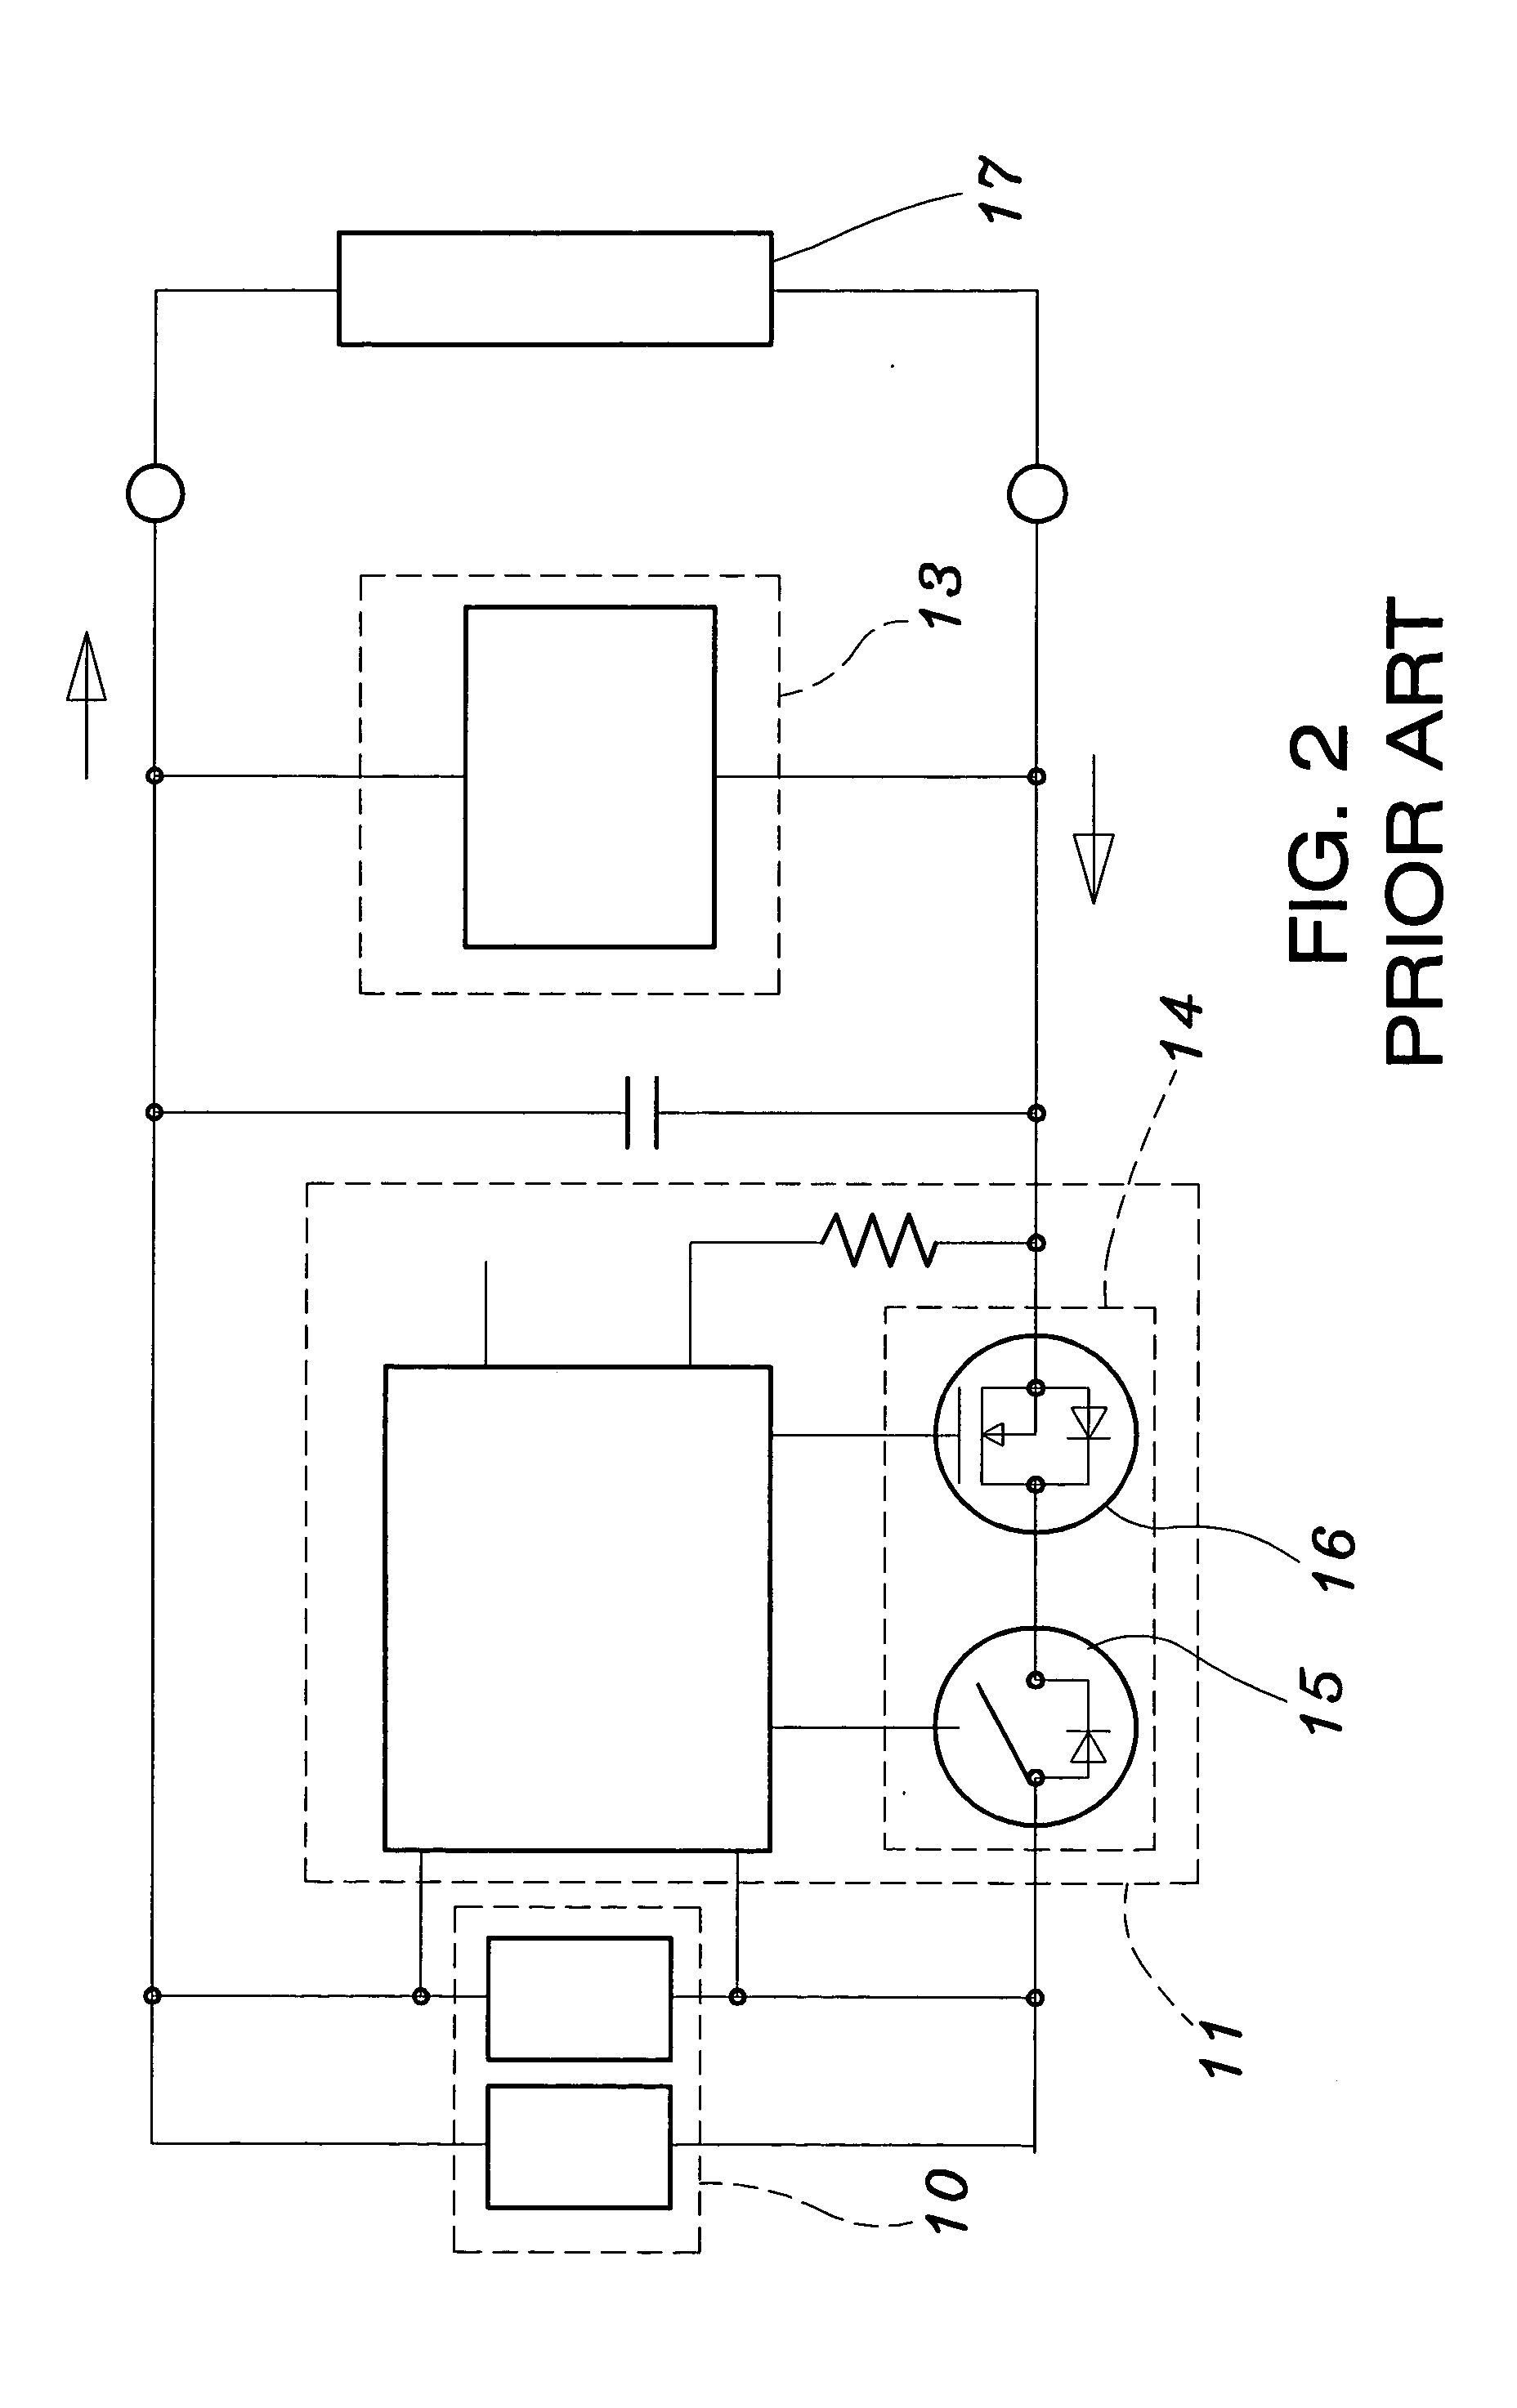 Circuit structure for rechargeable battery